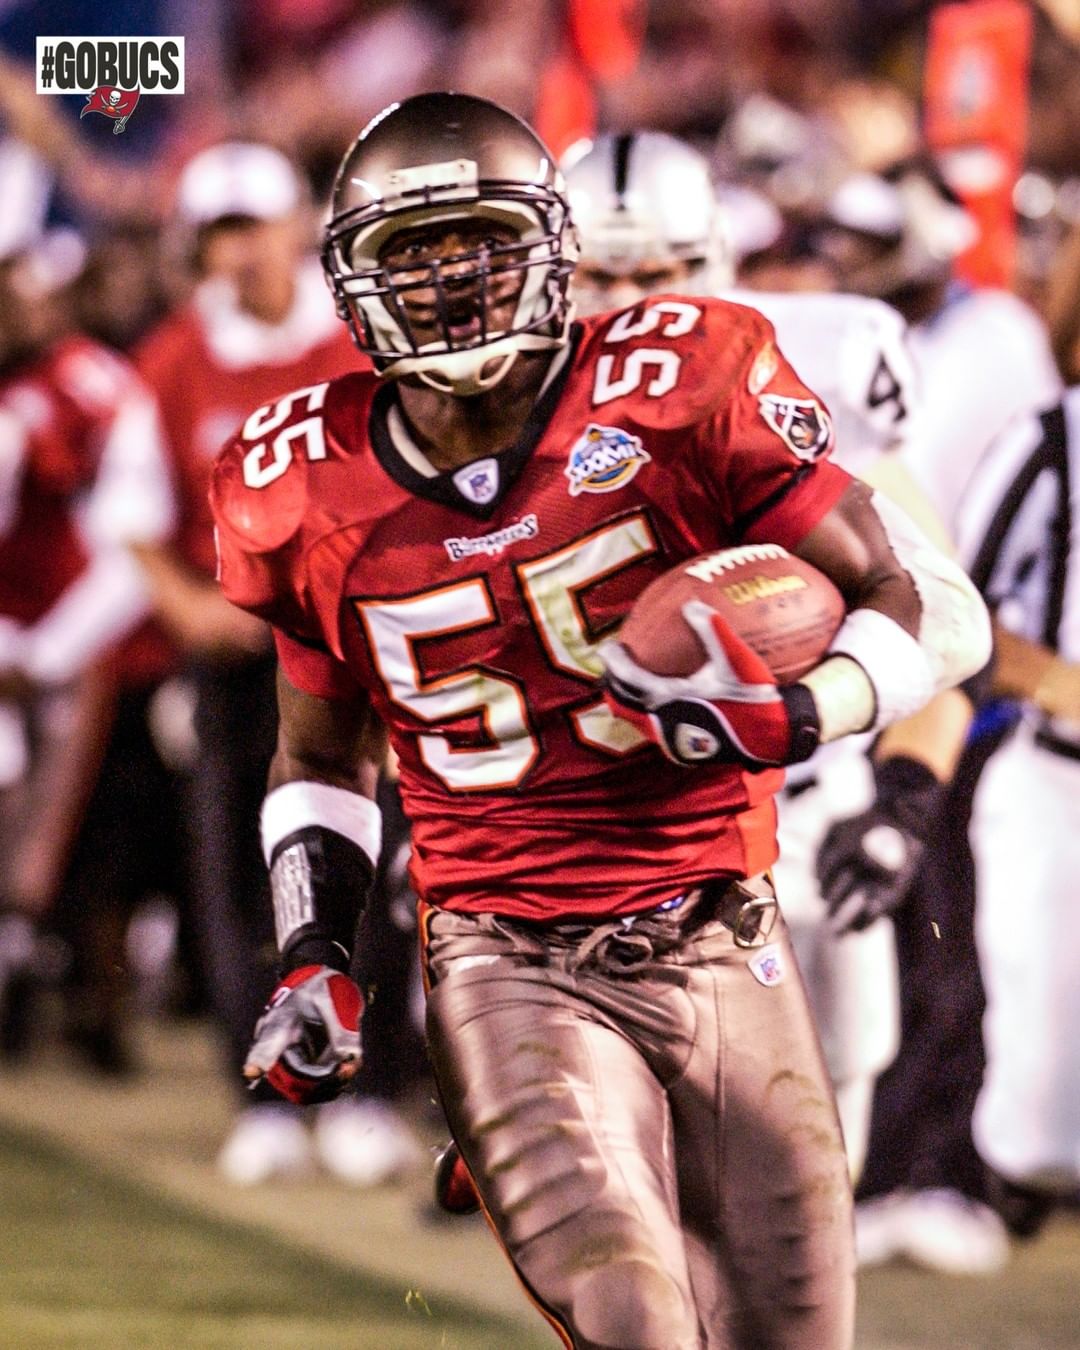 One of the best for this #TDTuesday  For more highlights, visit Buccaneers.com....